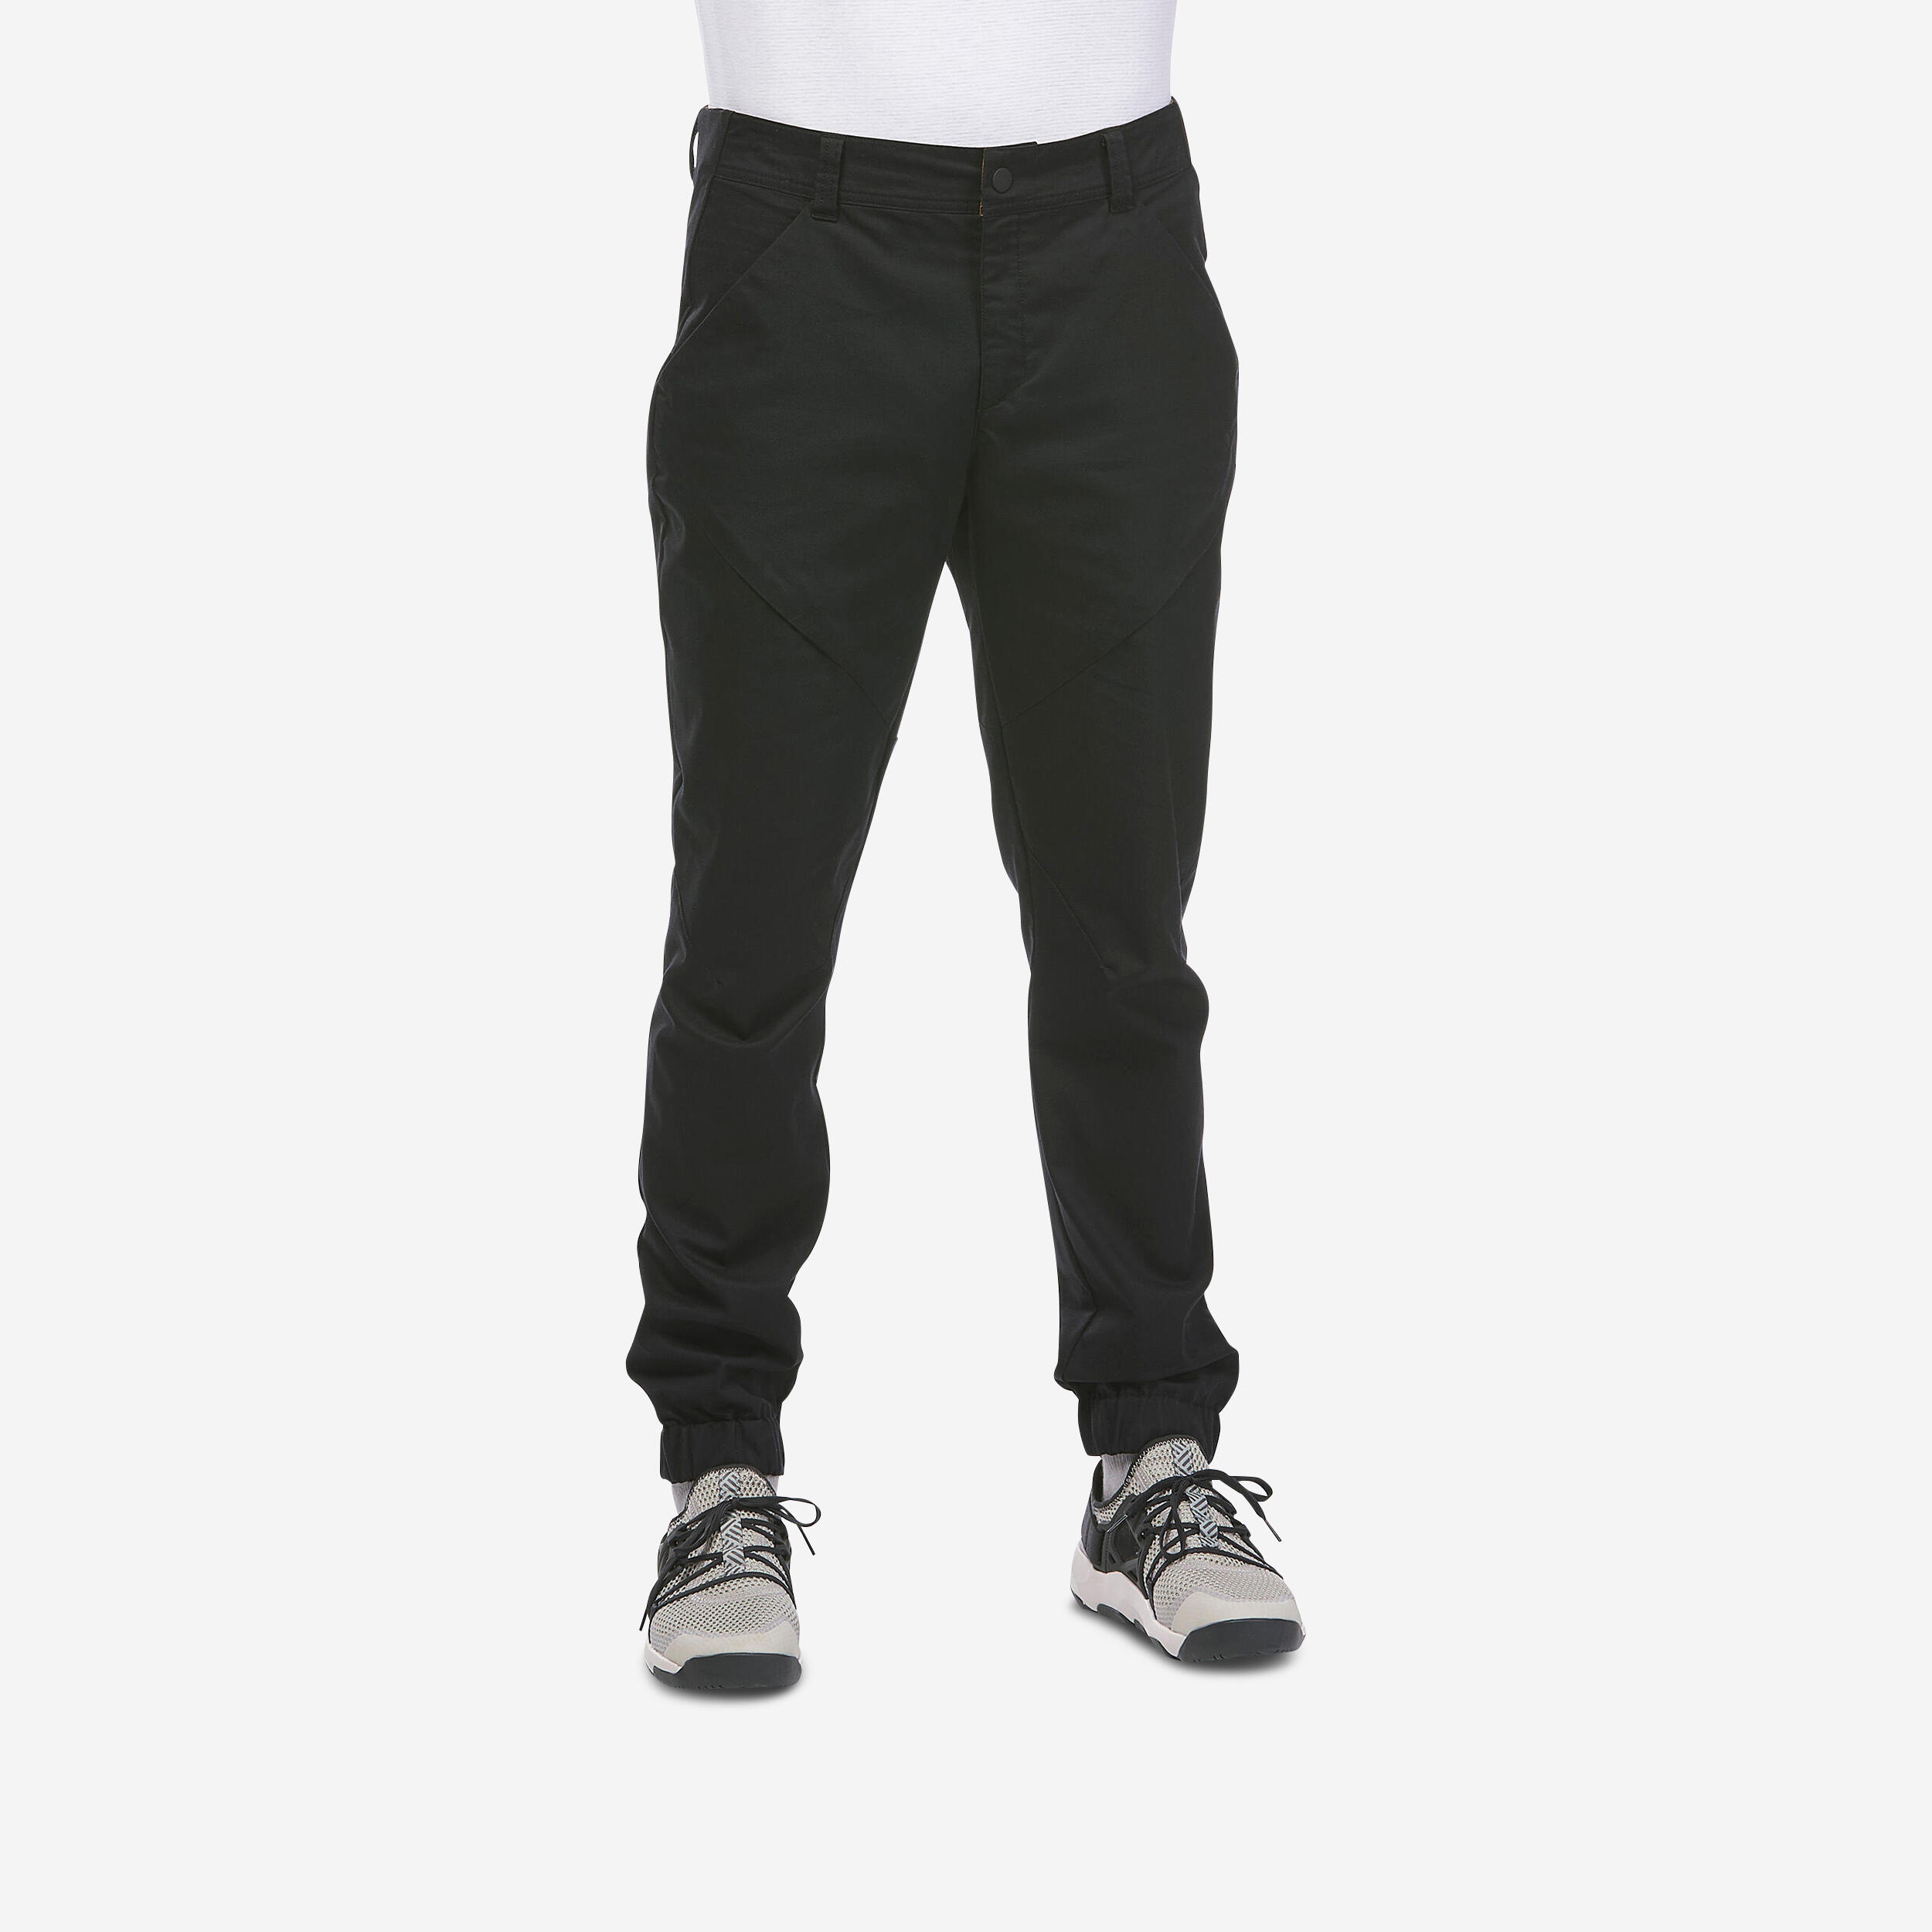 Essential Slim Pants | Shop the Highest Quality Golf Apparel, Gear,  Accessories and Golf Clubs at PXG